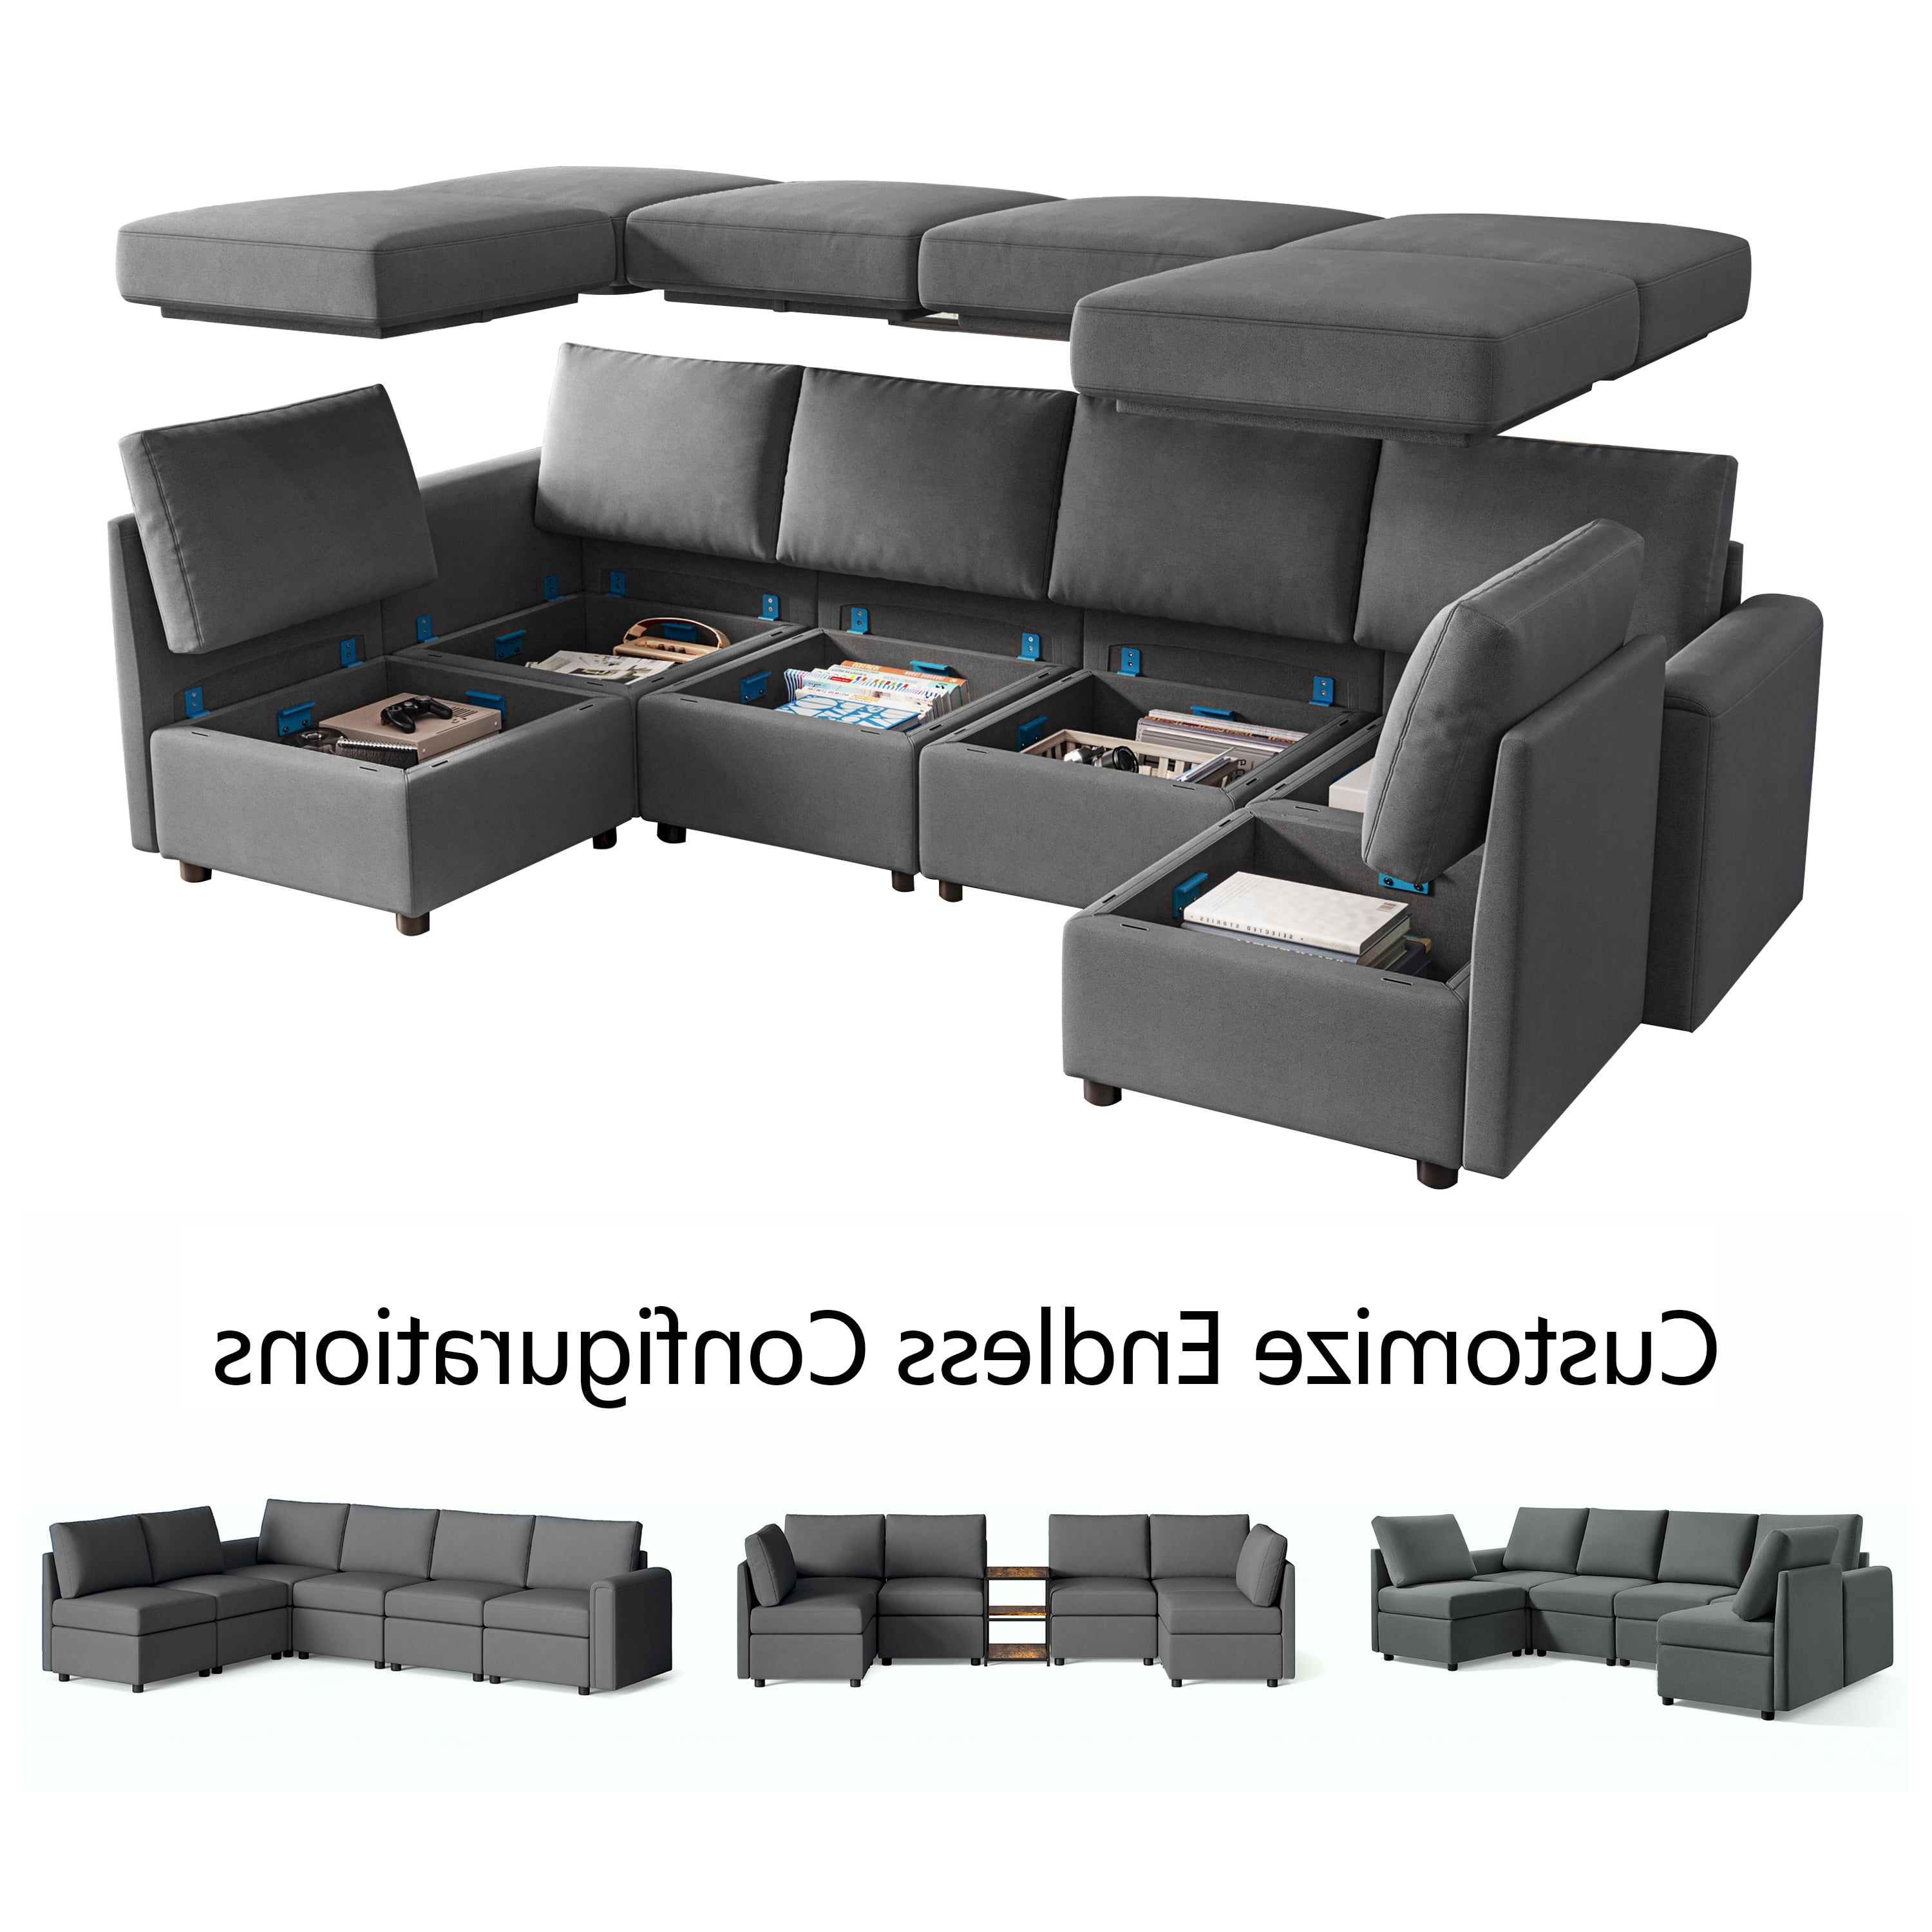 Linsy Home Modular Couches And Sofas Sectional With Storage Sectional Sofa  U Shaped Sectional Couch With Reversible Chaises, Dark Gray – Walmart With Sectional Sofa With Storage (View 3 of 20)